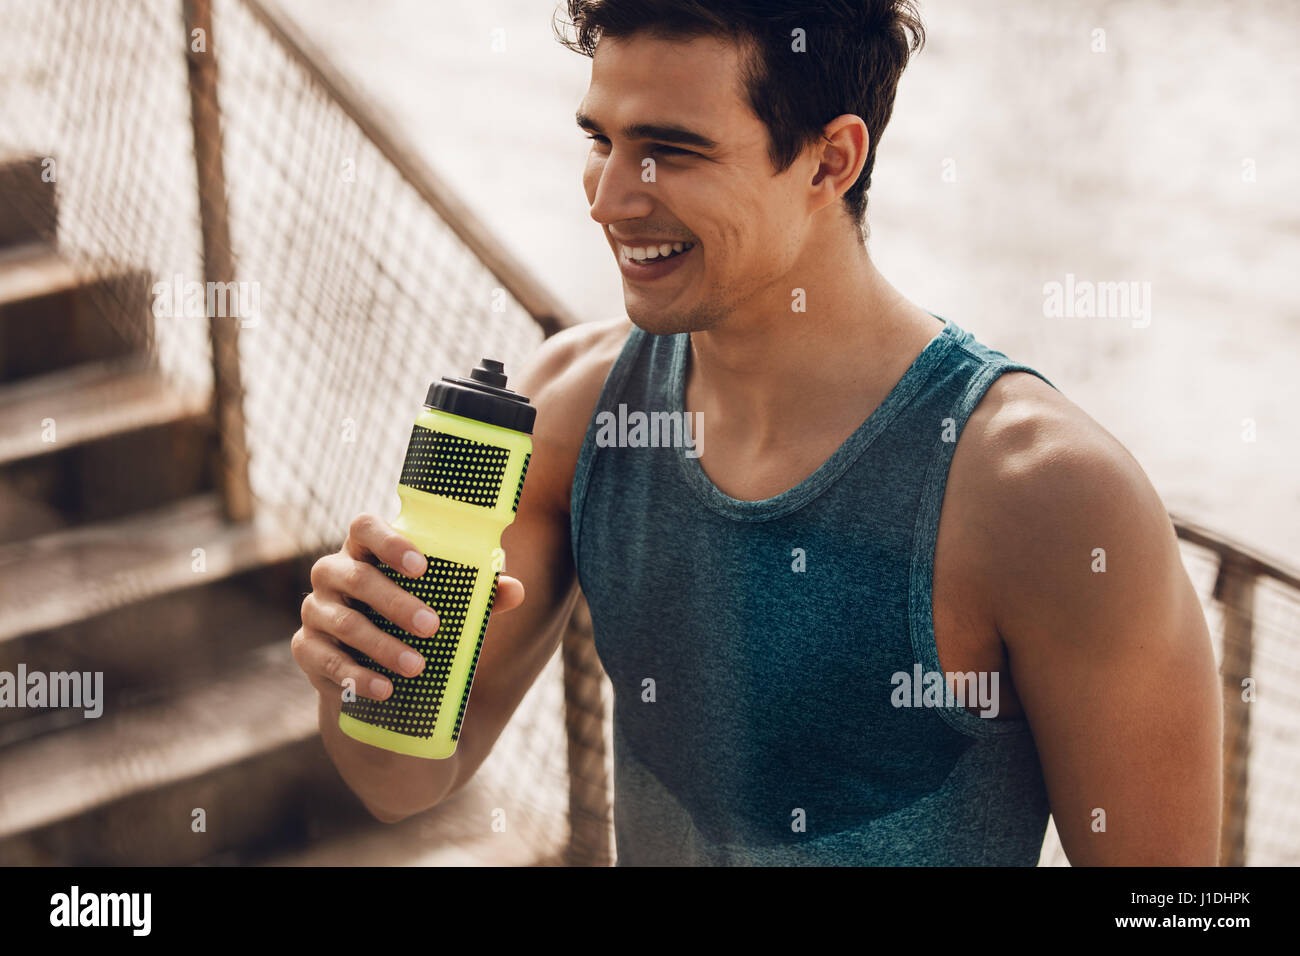 Athlete resting after running with bottle of water. Rest after a hard workout at beach. Stock Photo